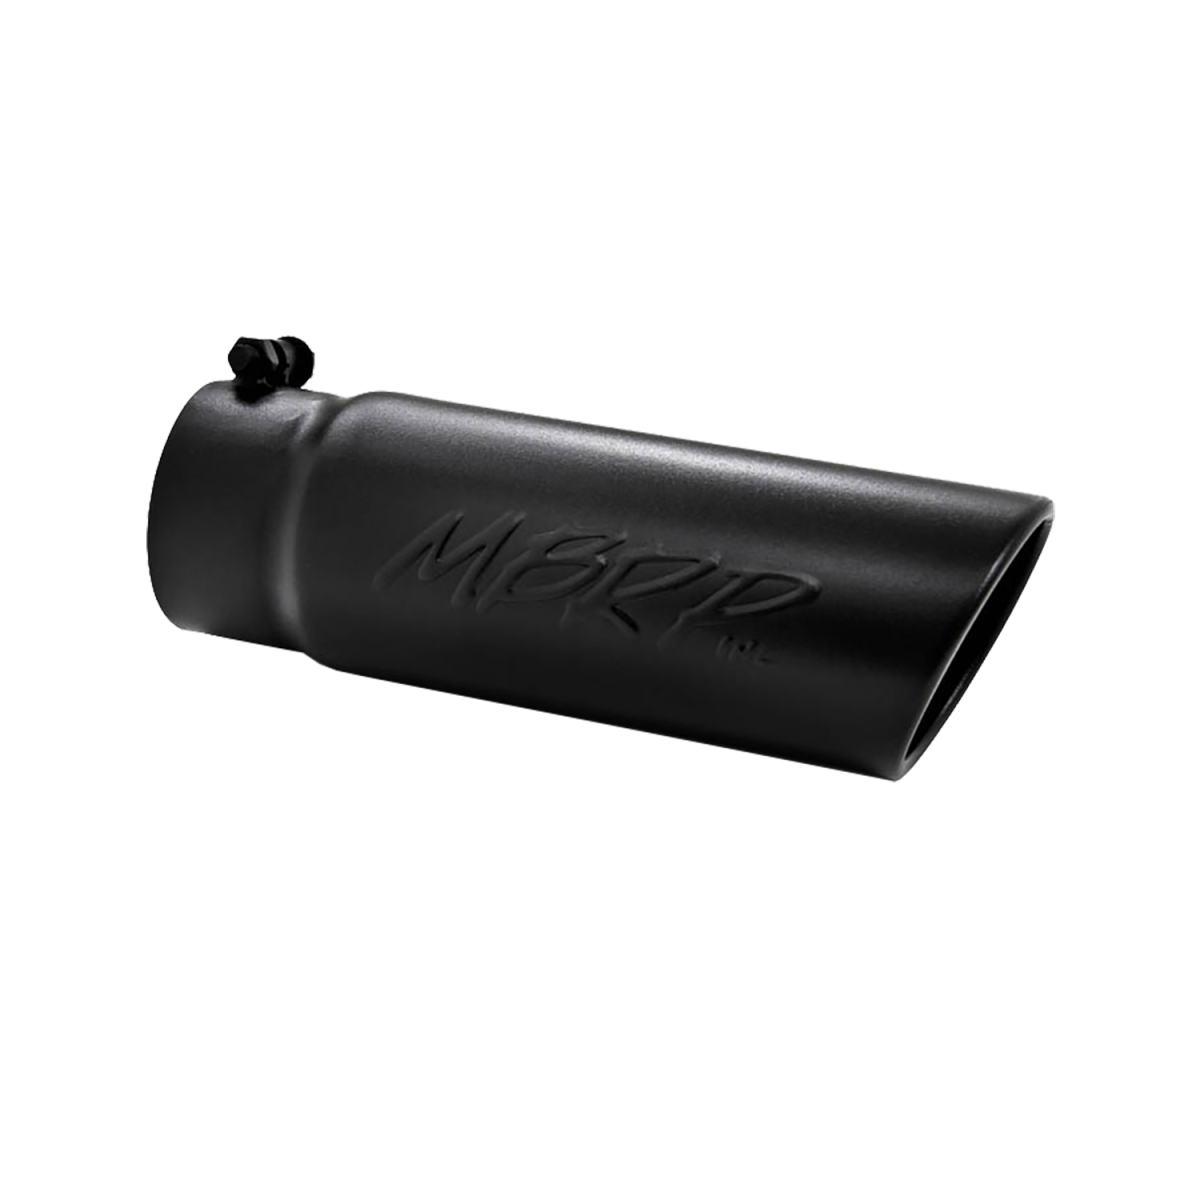 MBRP - MBRP Exhaust Tip 4 Inch O.D. Angled Rolled End 3 1/2 Inch Inlet 12 Inch Length Black Finish T5112BLK